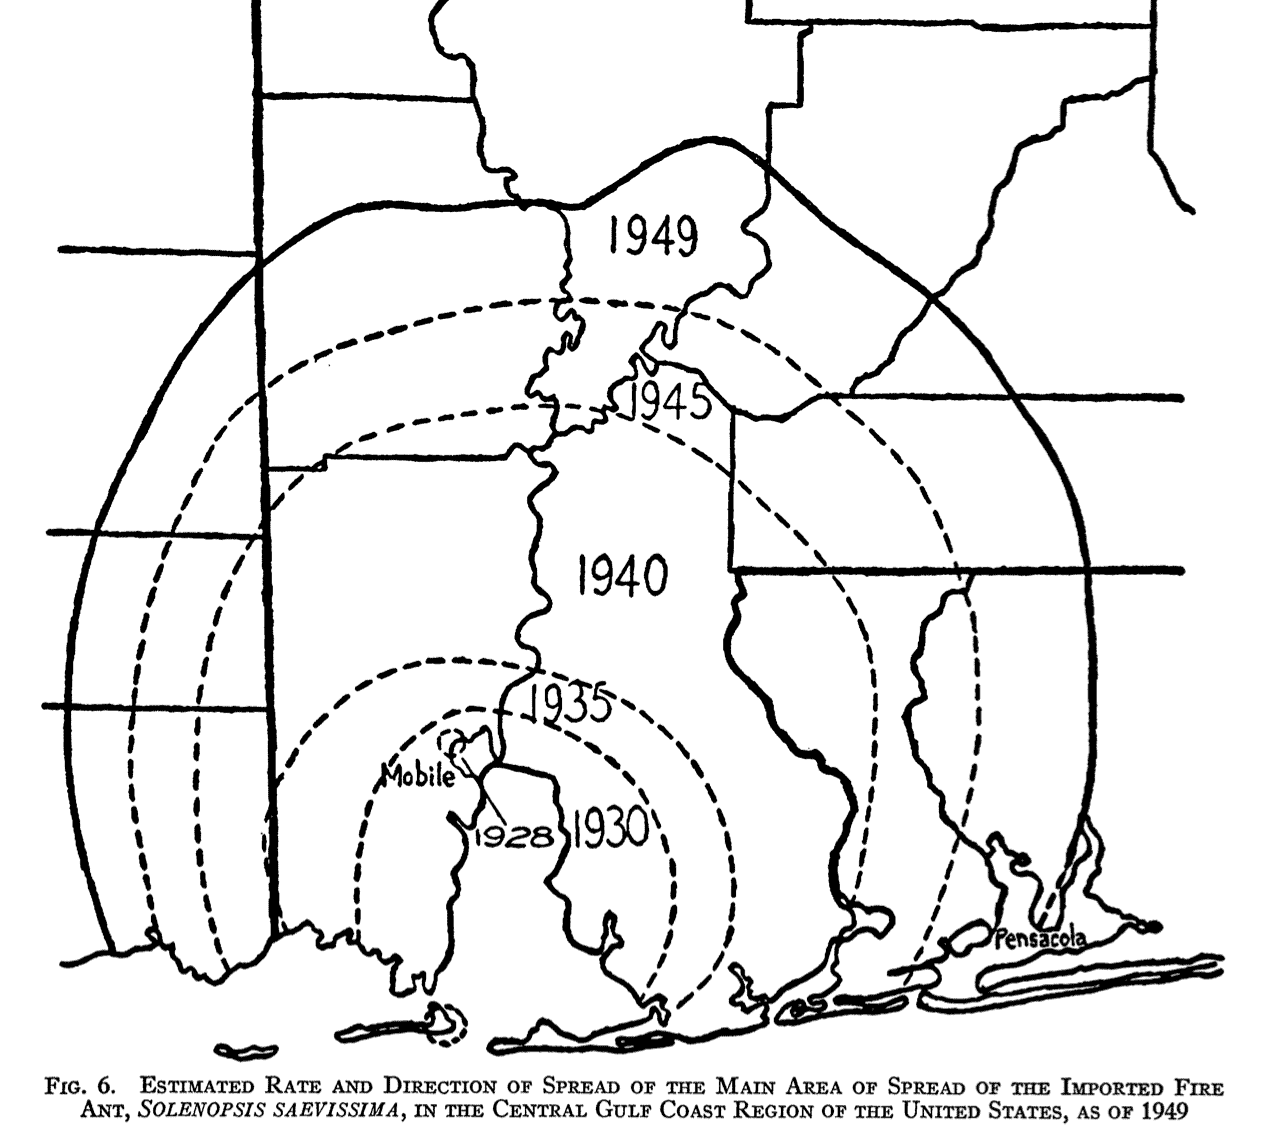 Fire ant initial invasion area from 1928-1949